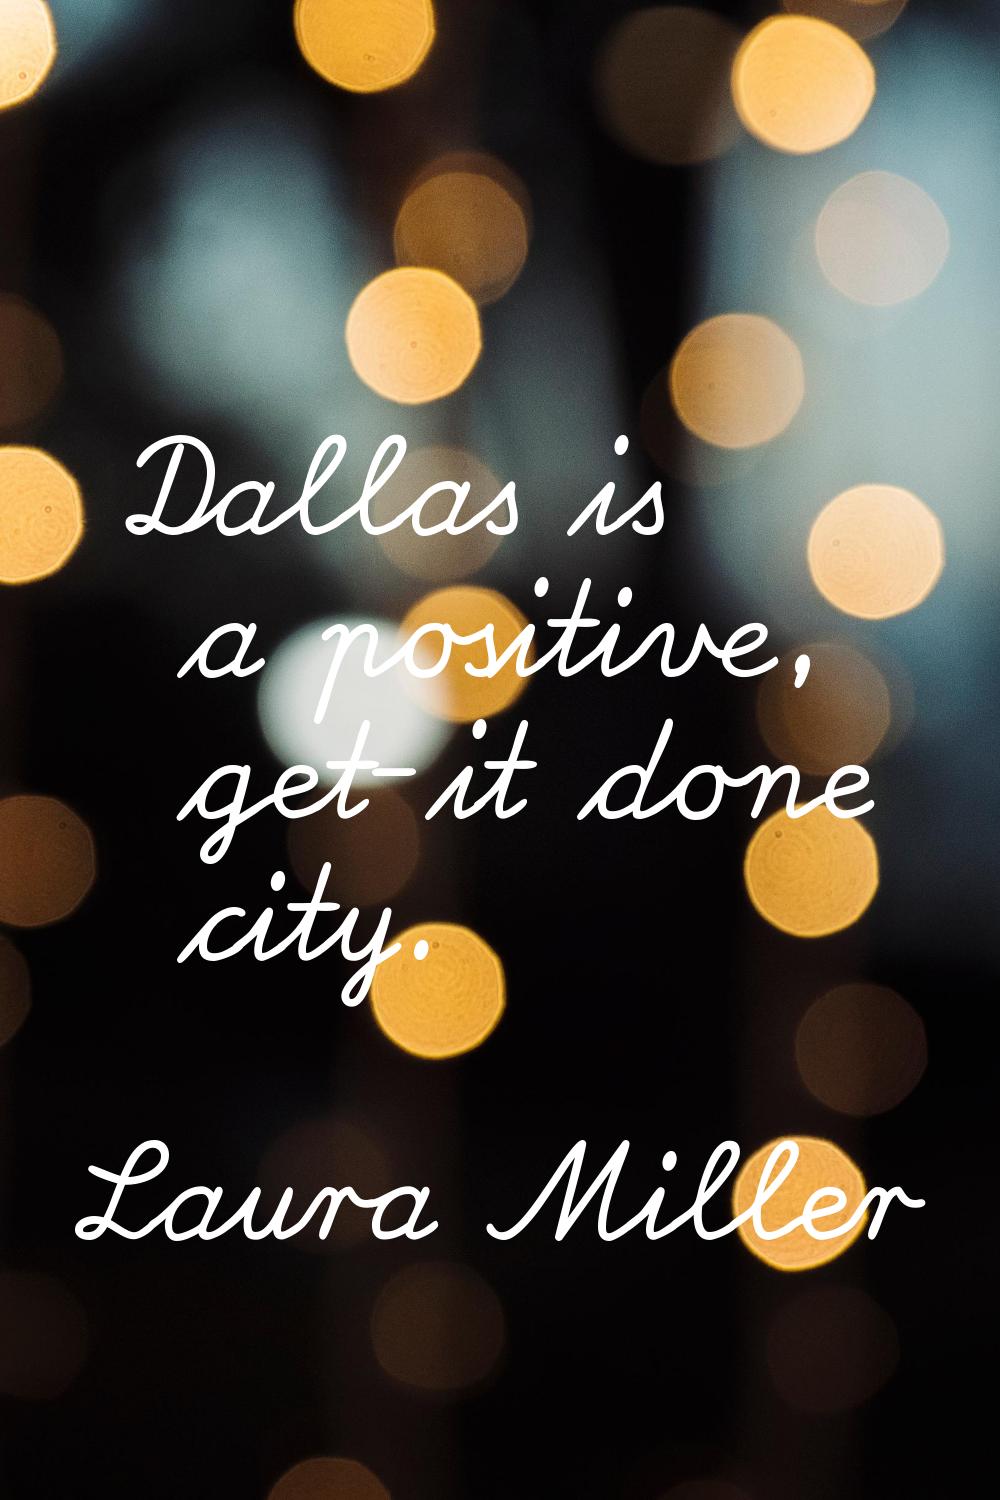 Dallas is a positive, get-it done city.